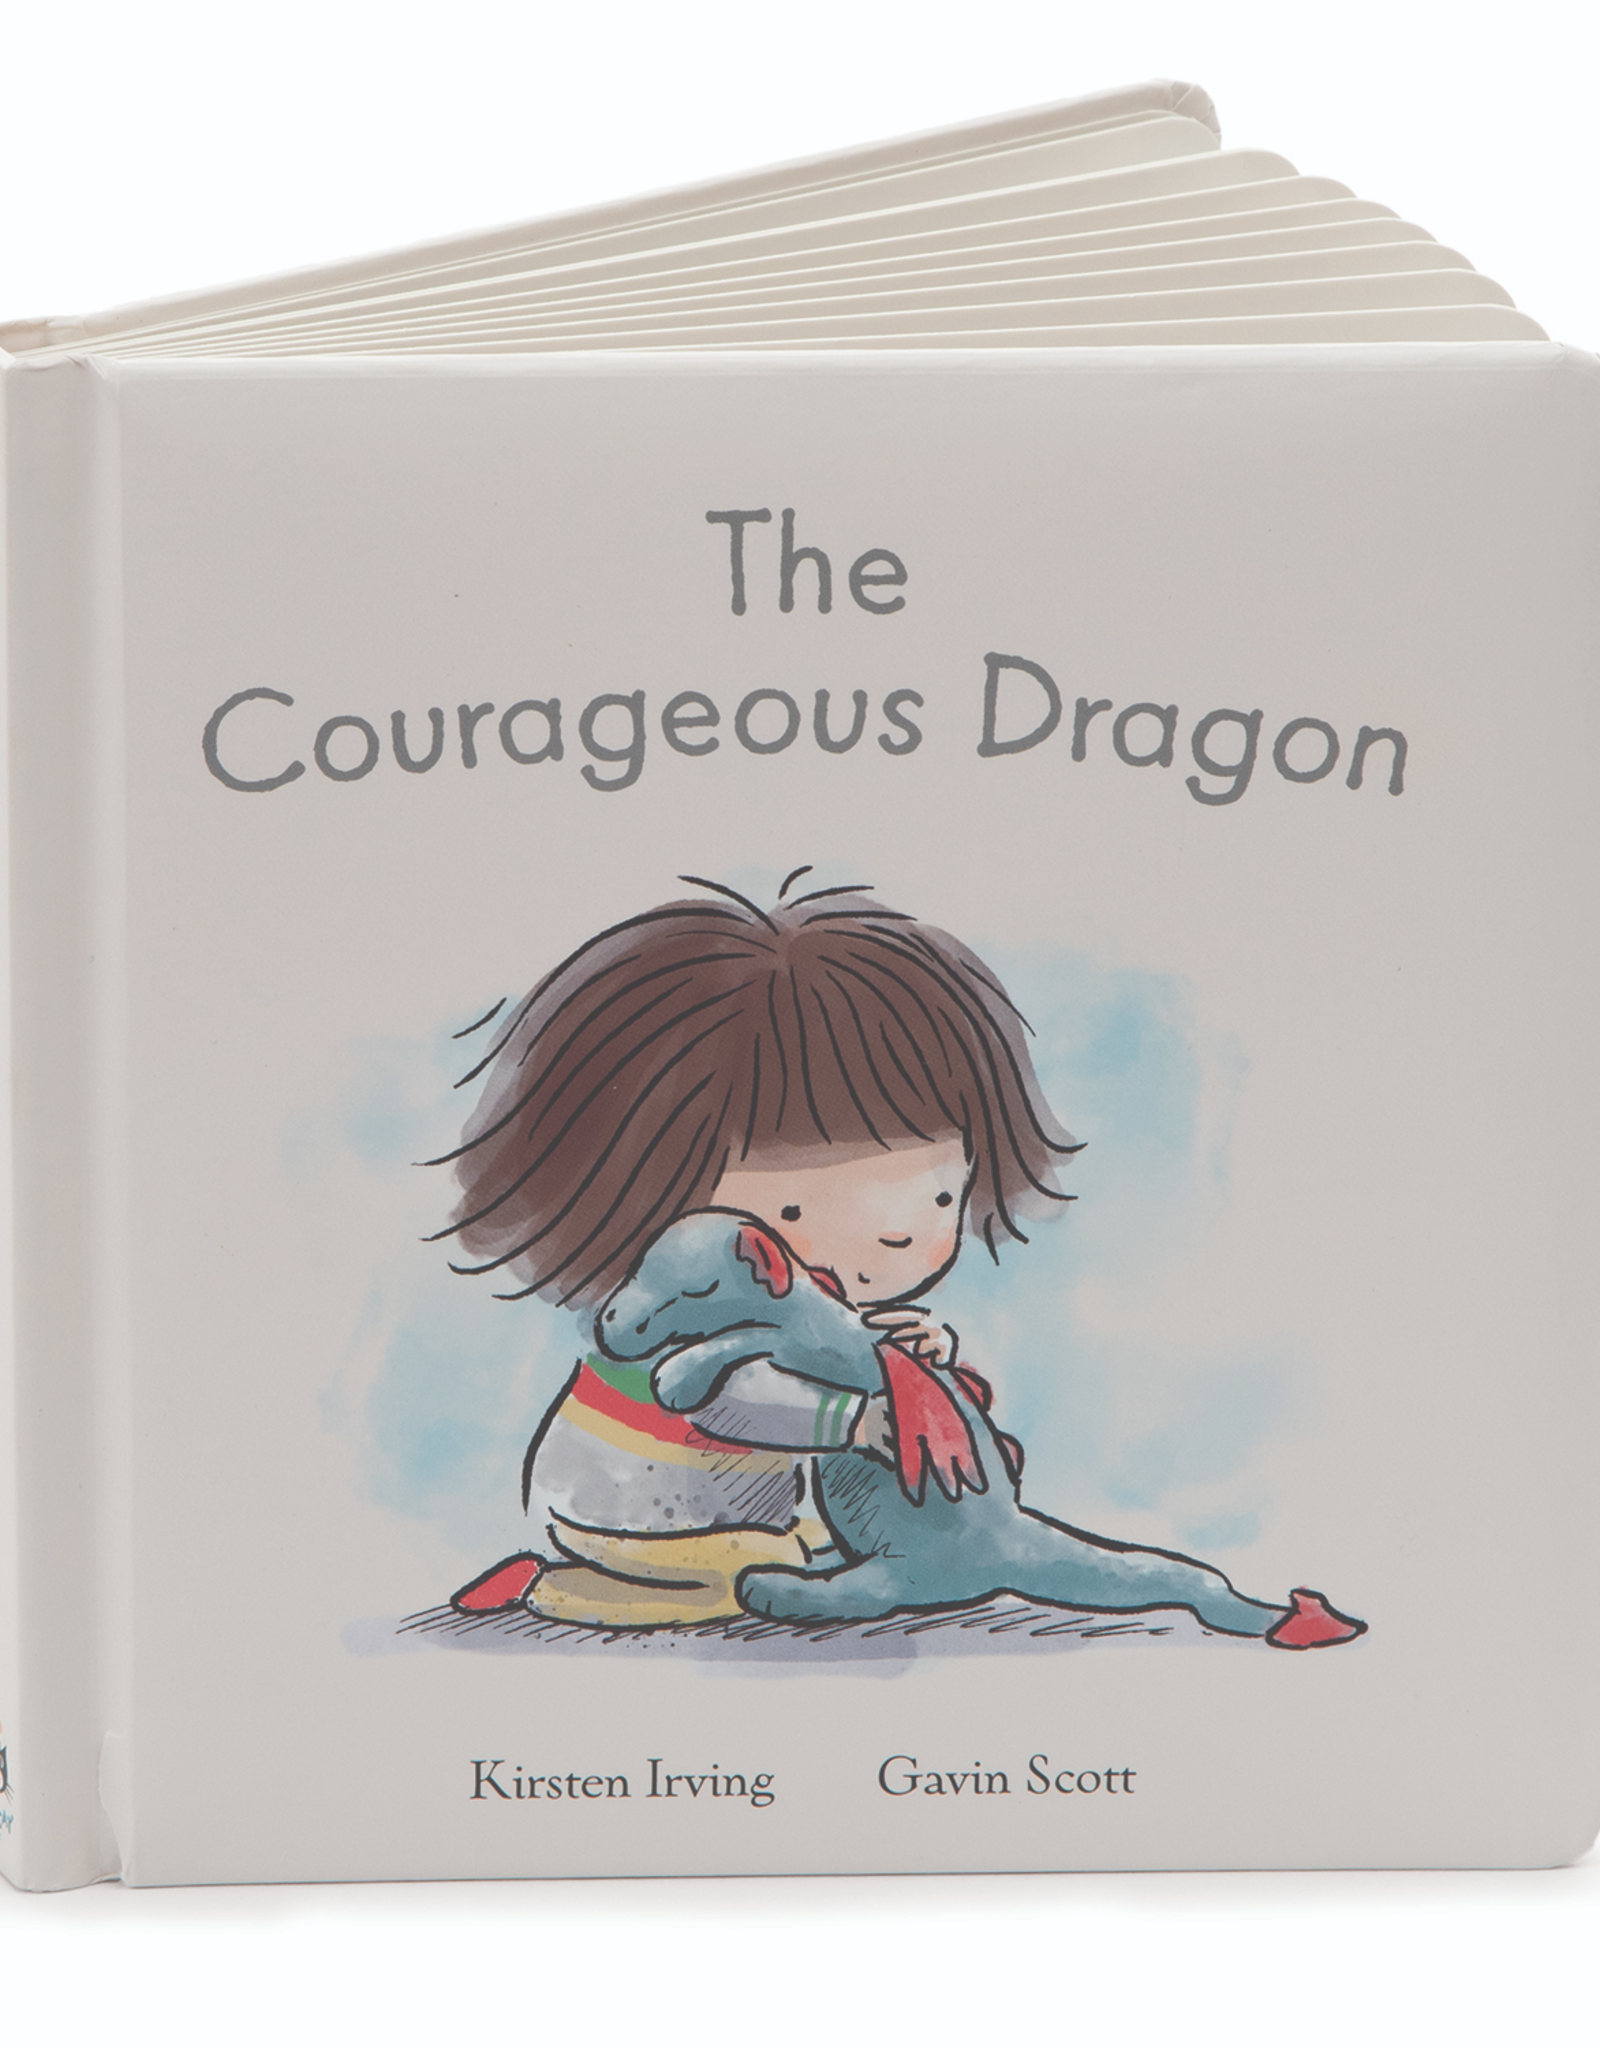 The Courageous Dragon Book by Kirsten Irving and Gavin Scott